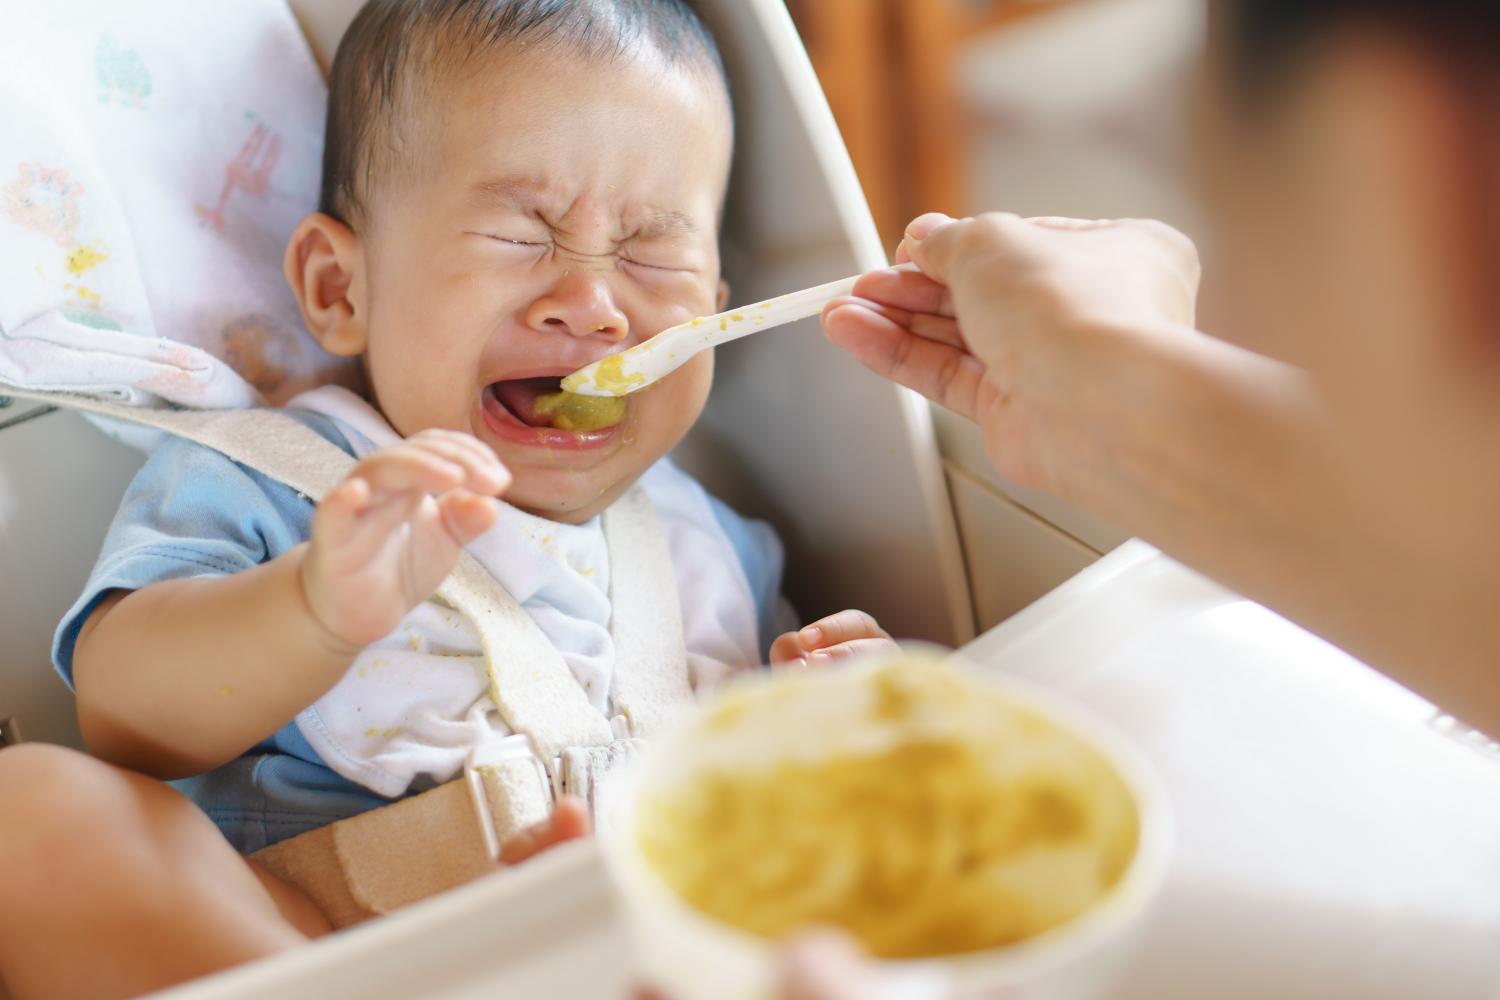 Overcoming feeding aversion in infants through occupational therapy